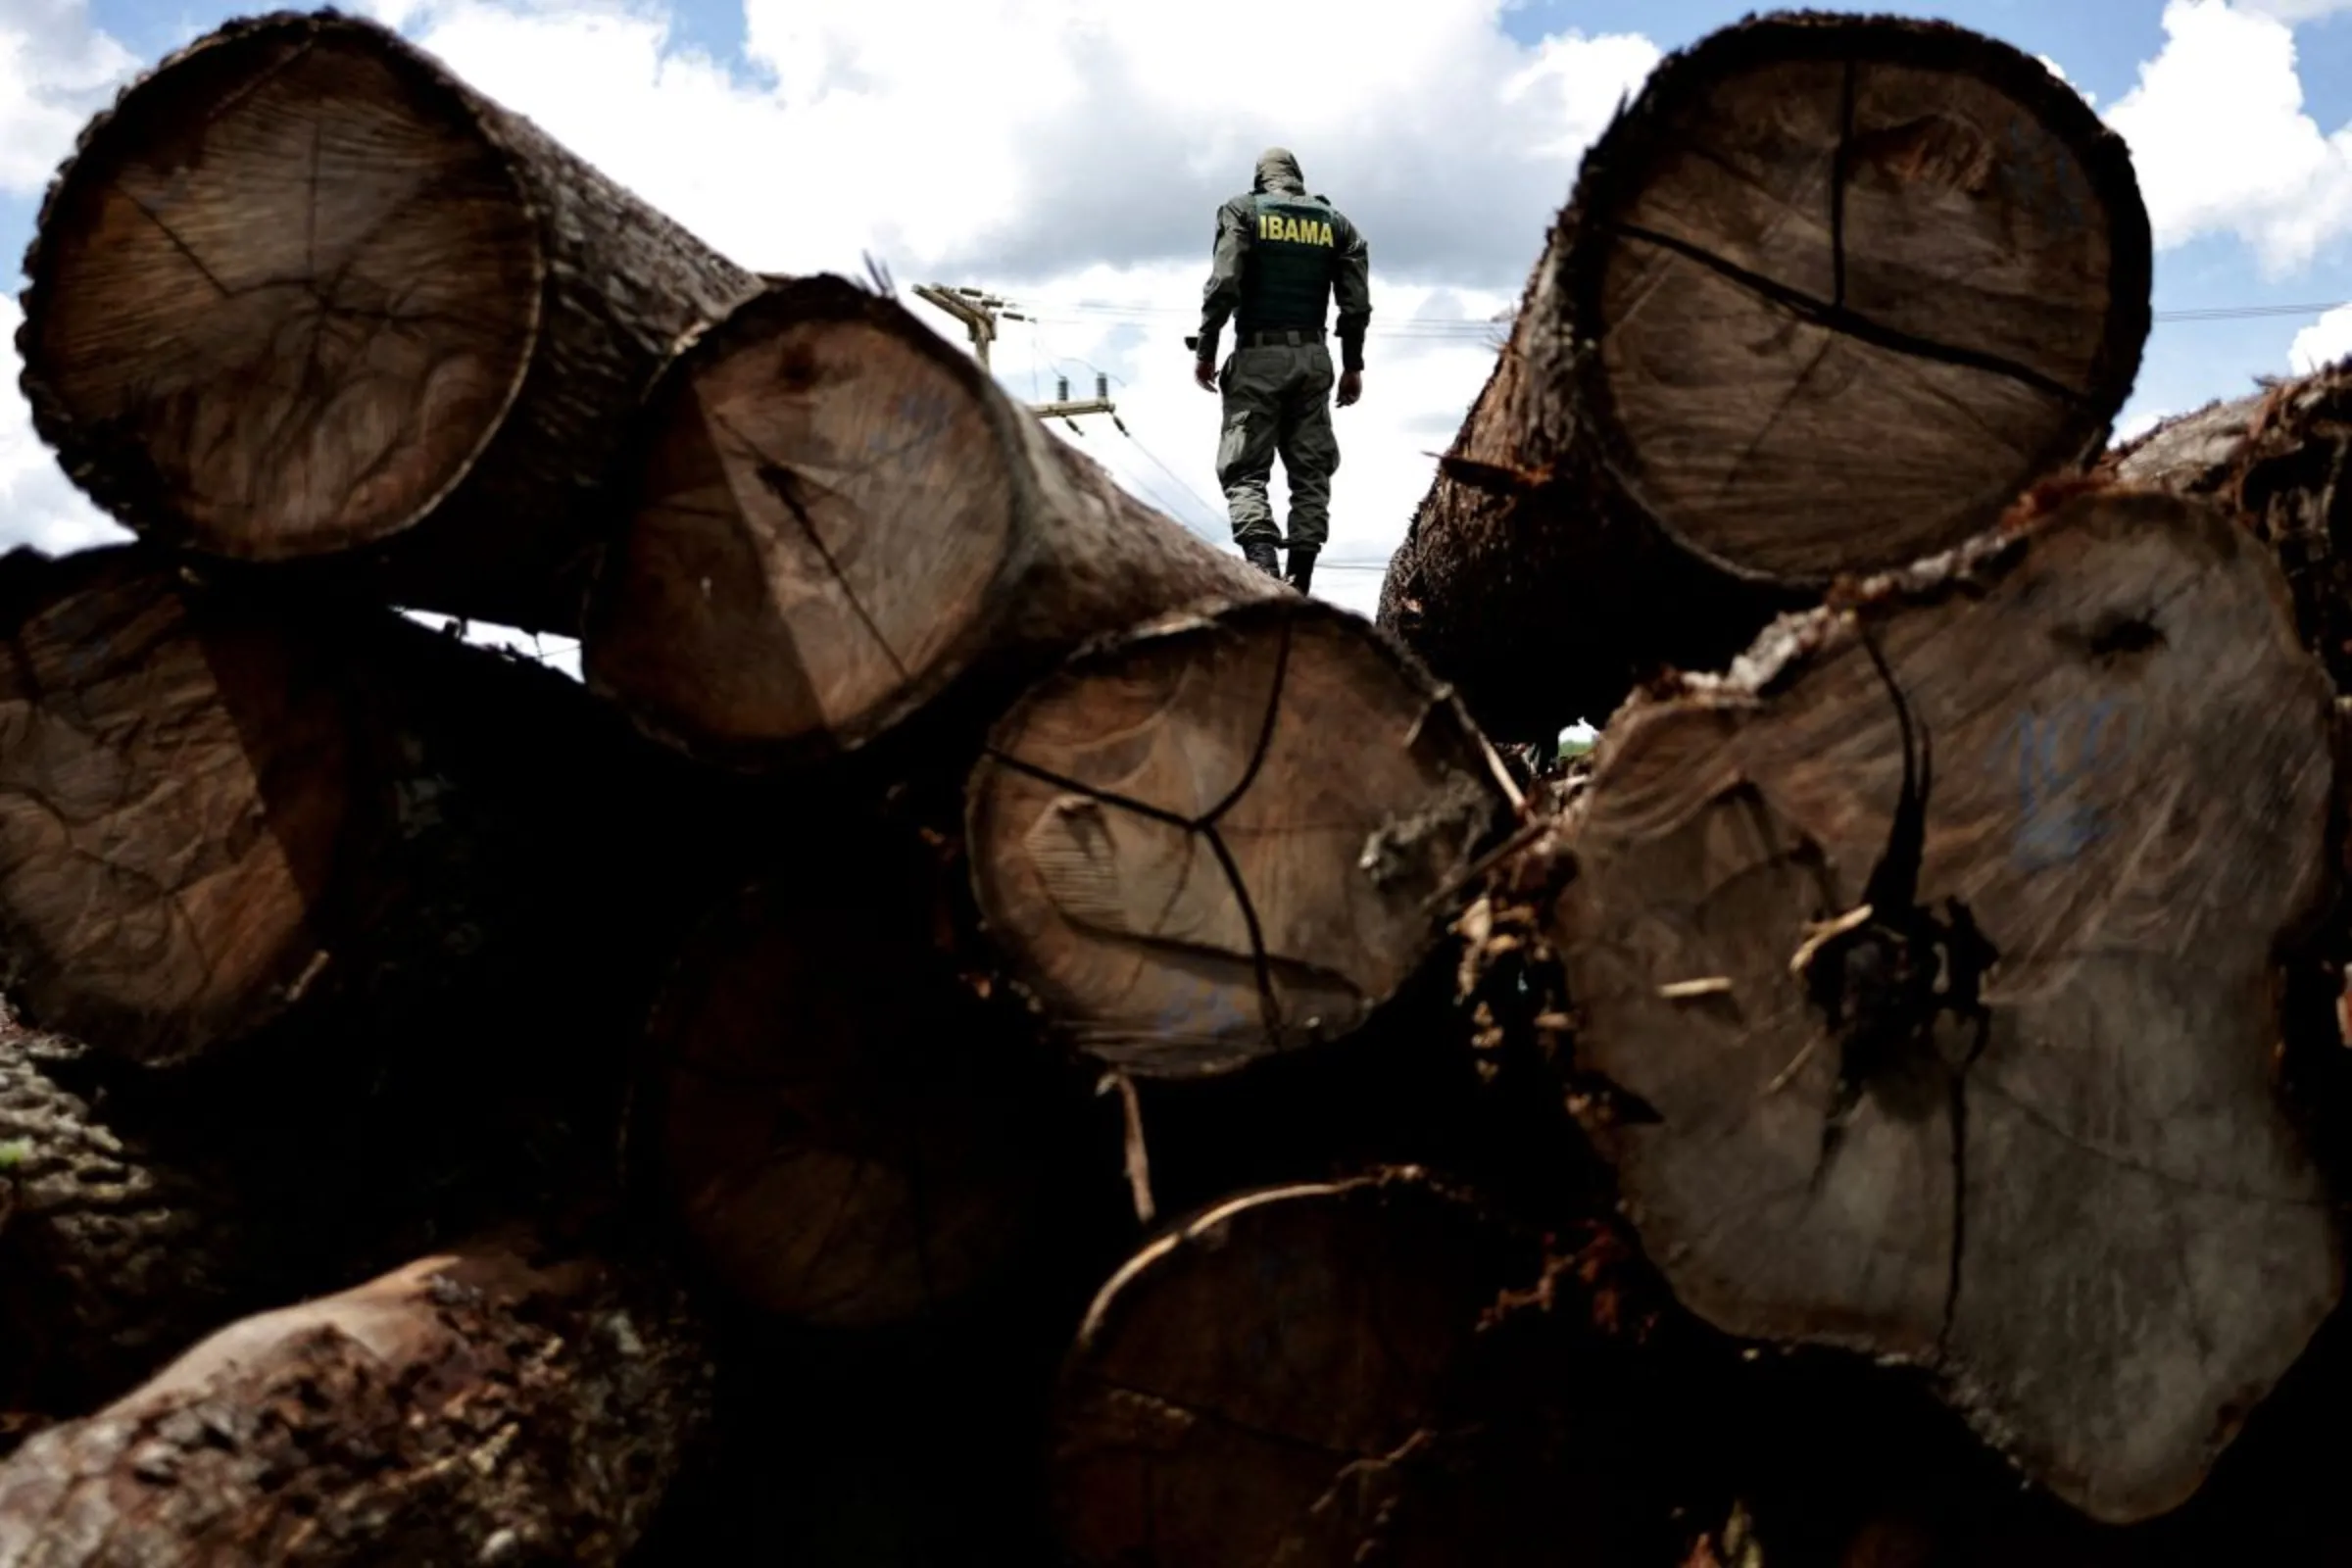 An agent of the Brazilian Institute for the Environment and Renewable Natural Resources (IBAMA) inspects a tree extracted from the Amazon rainforest, in a sawmill during an operation to combat deforestation, in Placas, Para State, Brazil January 20, 2023. REUTERS/Ueslei Marcelino